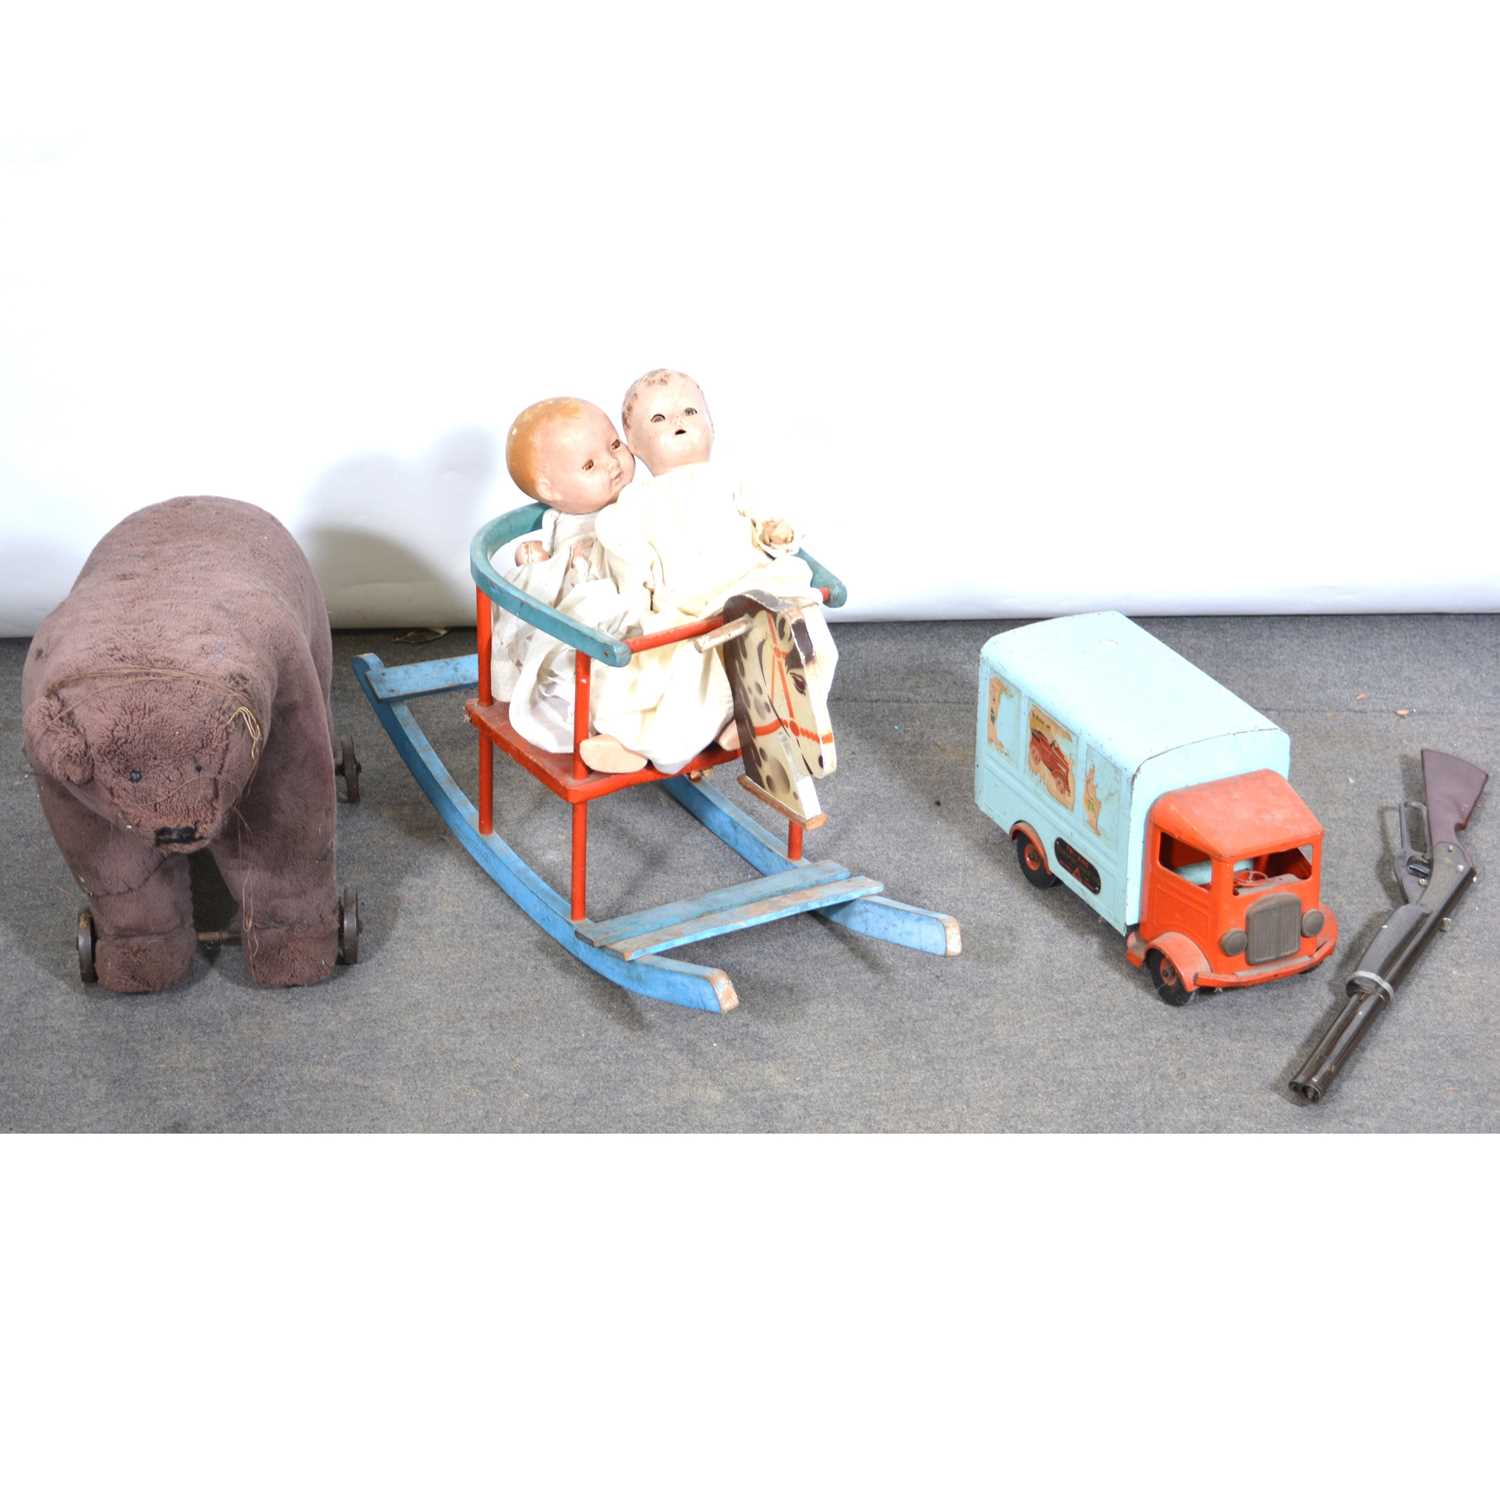 Lot 120 - Vintage toys including a ride-on growling bear, Tri-ang Transport van, dolls etc